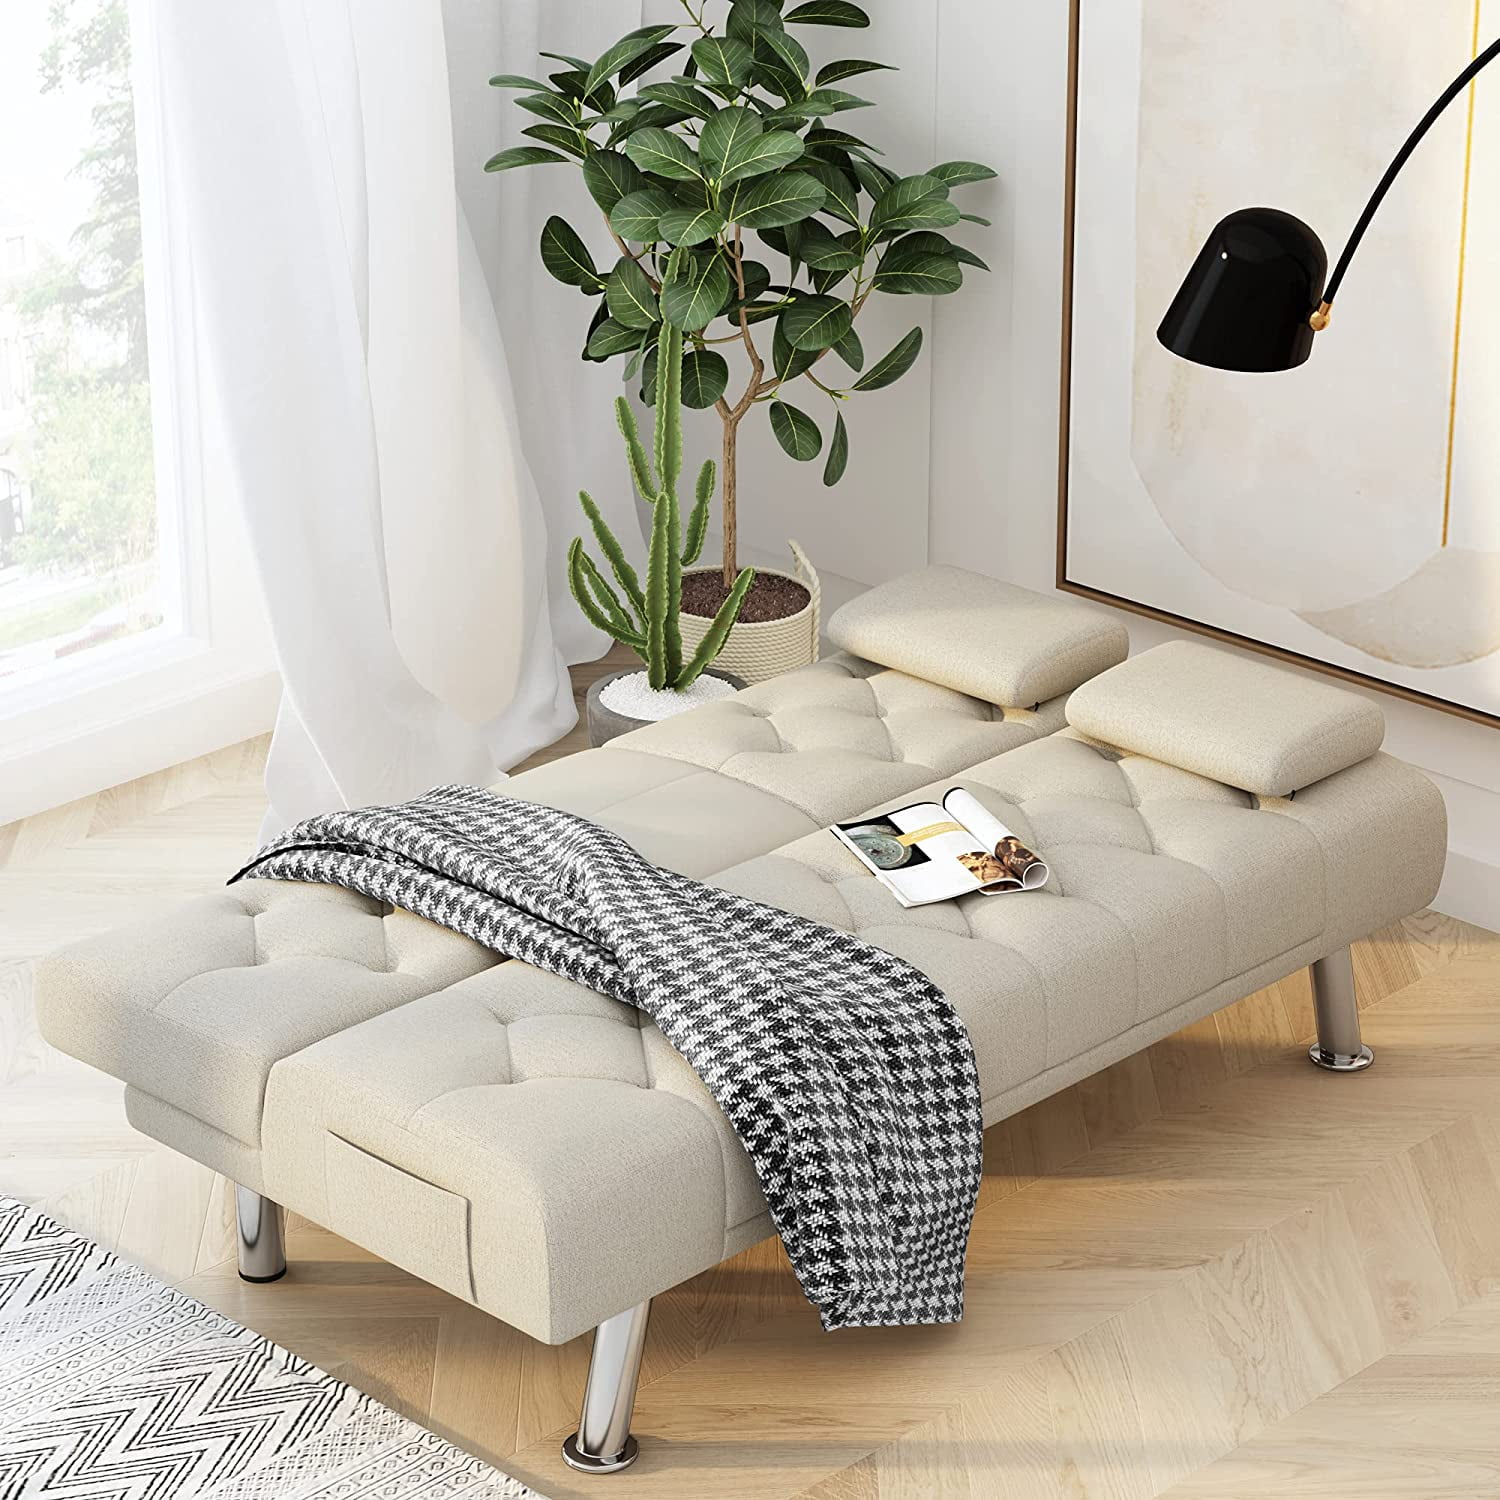 Homfa Upholstered Sofa Bed Couch, Convertible Futon Sleeper Sofa with  Removable Armrests and 2 Cup Holders, Cream White 